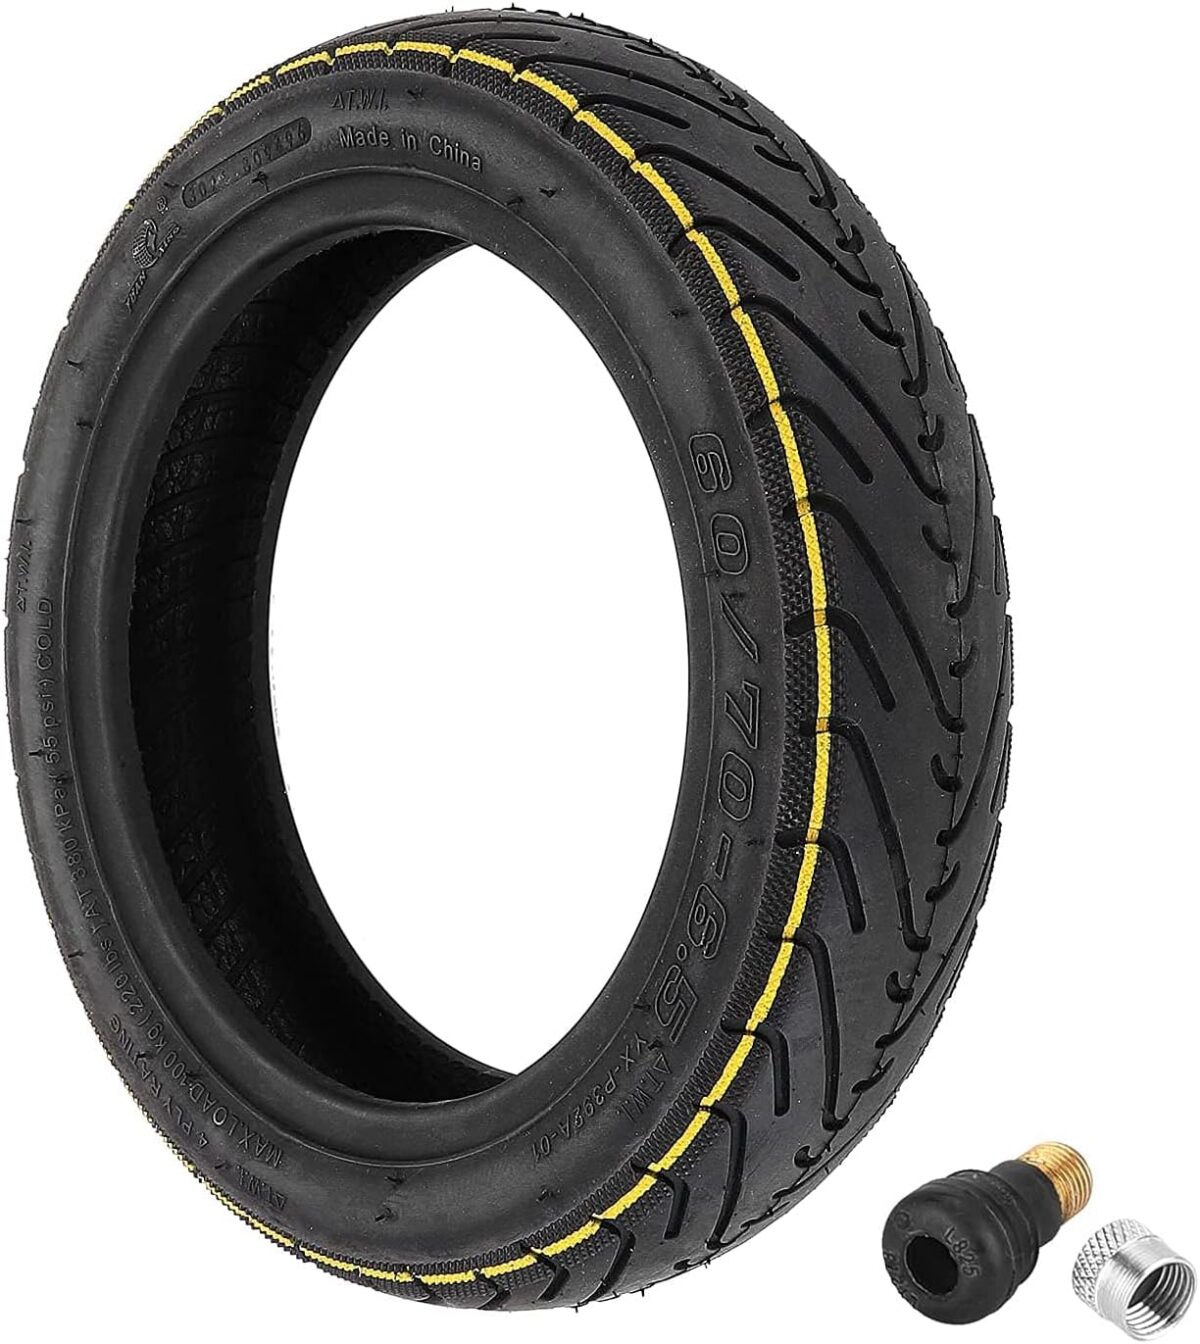 YBang 6070-6.5 tubeless tire with valve for Segway Ninebot Max G30 G30P G30LP electric scooter solid rubber tires 10-inch anti-slip explosion-proof tires 1 Pce